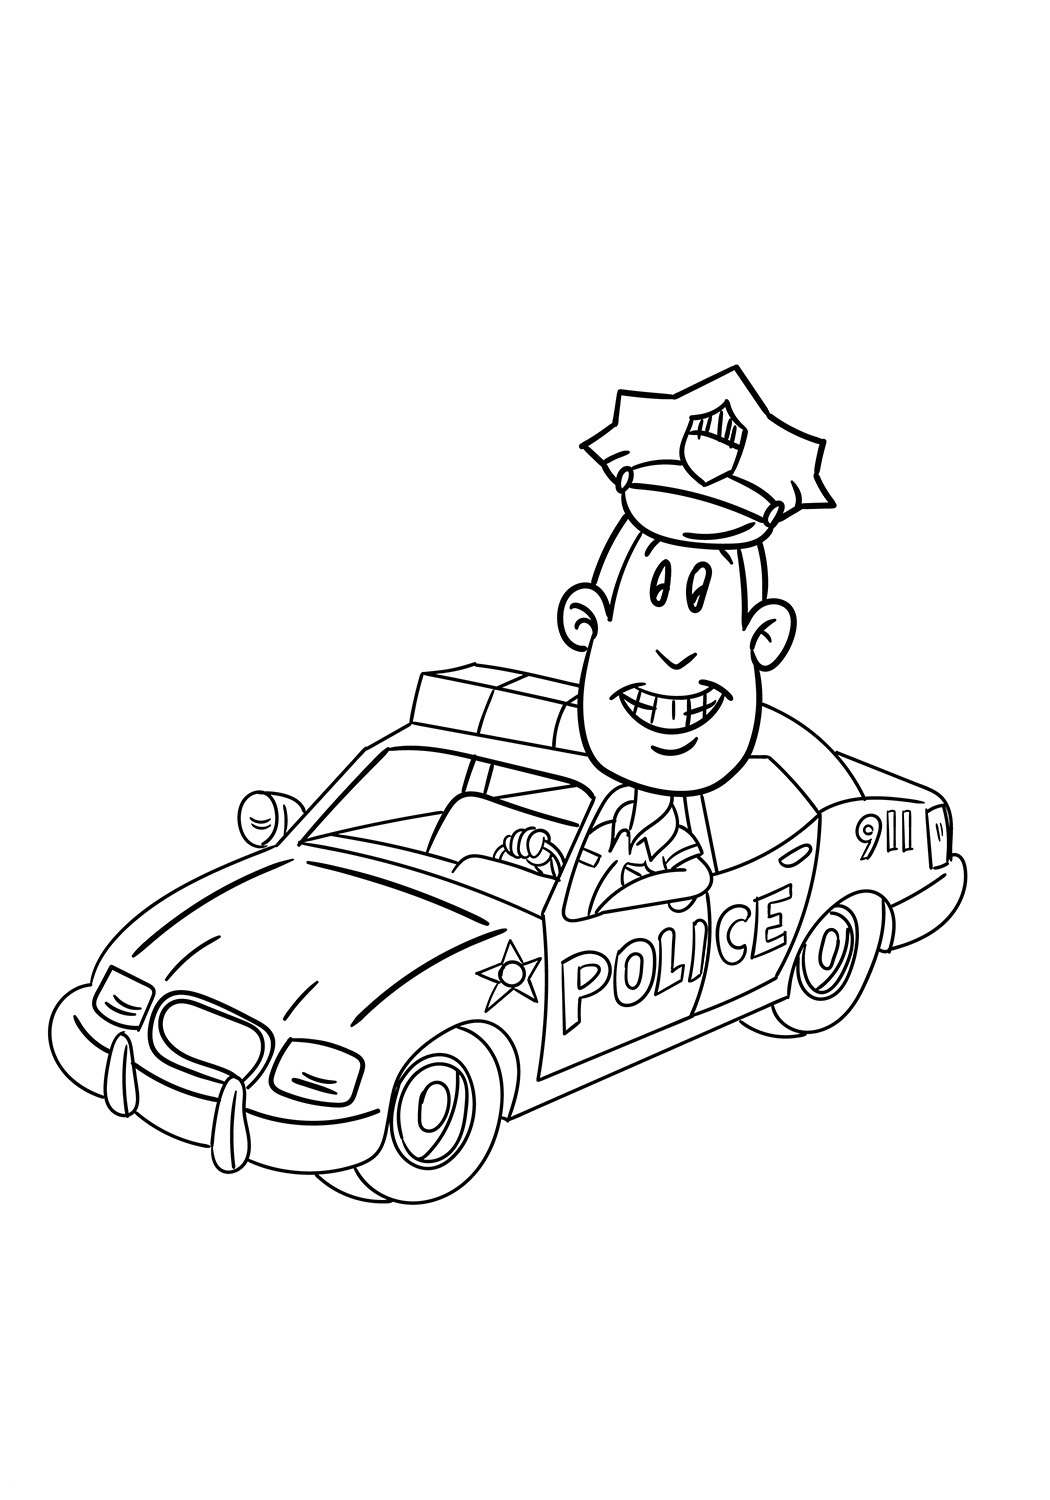 The Policeman In The Car Coloring Page - Free Printable Coloring Pages